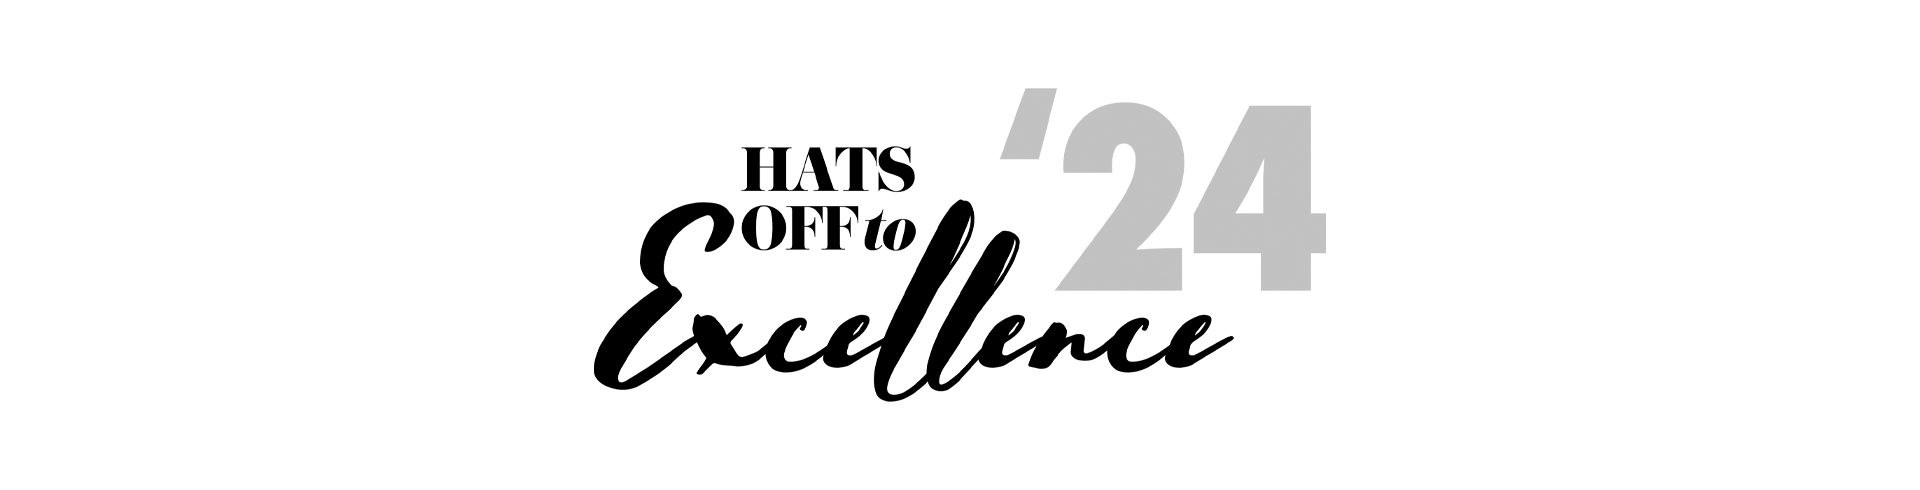 Hats Off to Excellence banner